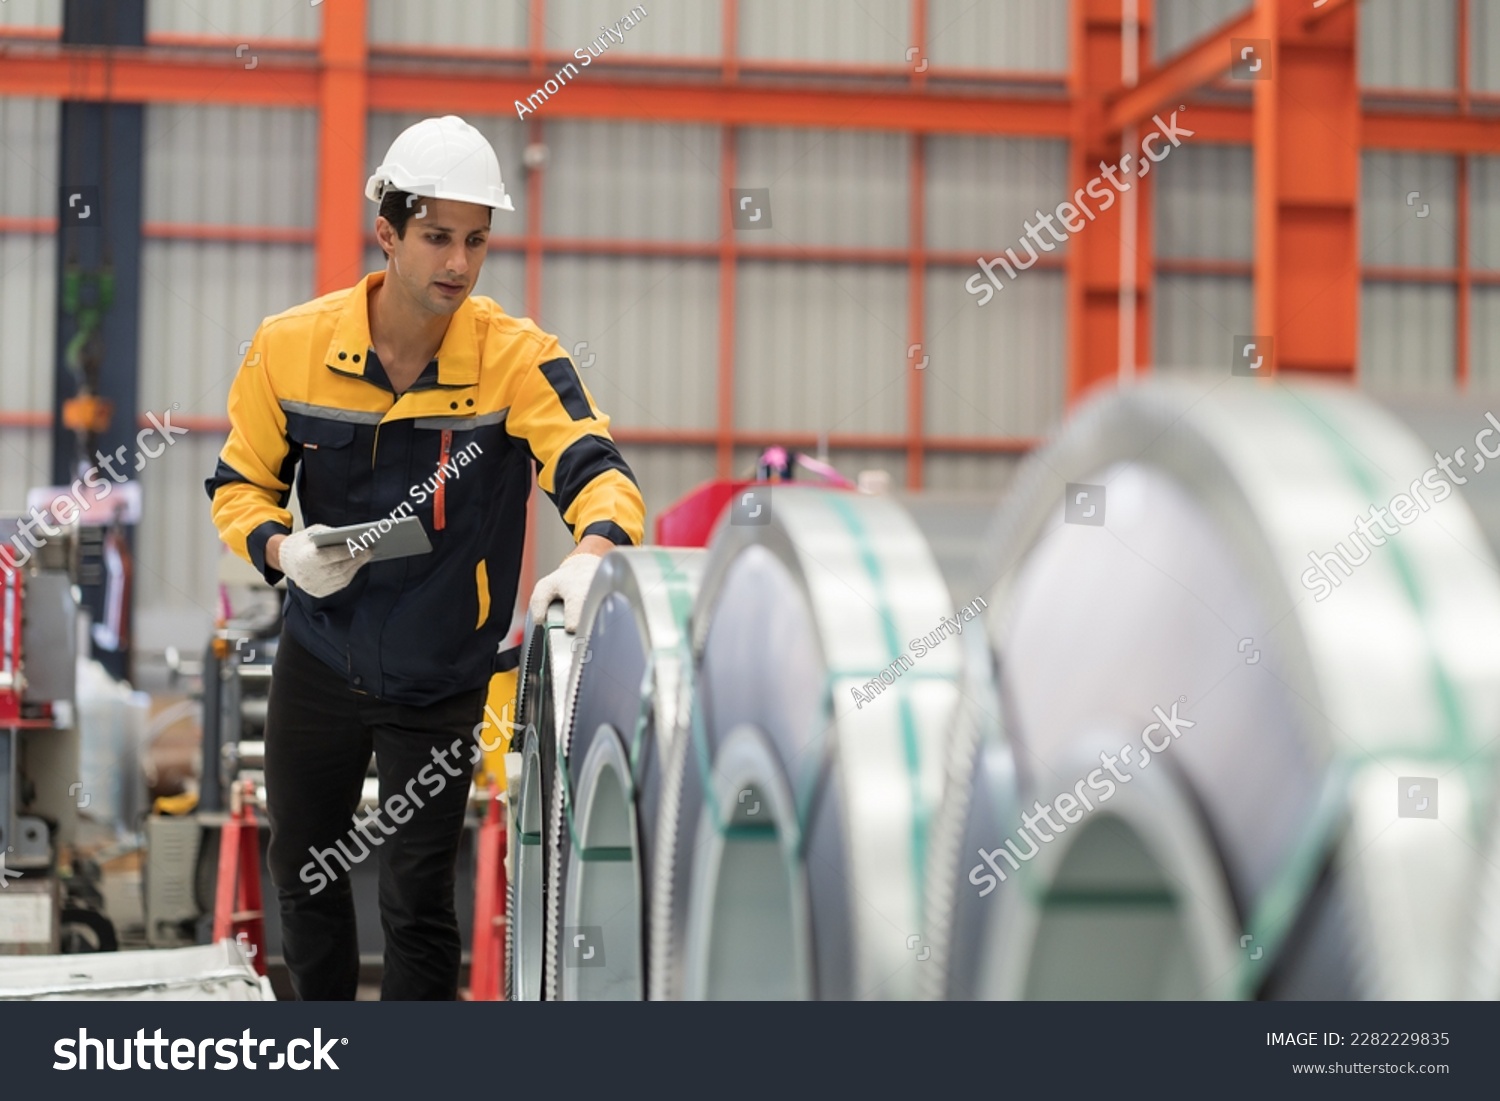 Metalwork manufacturing, warehouse of raw materials. Male factory worker inspecting quality rolls of metal sheet in factory during manufacturing process, wearing safety uniform, use digital tablet #2282229835